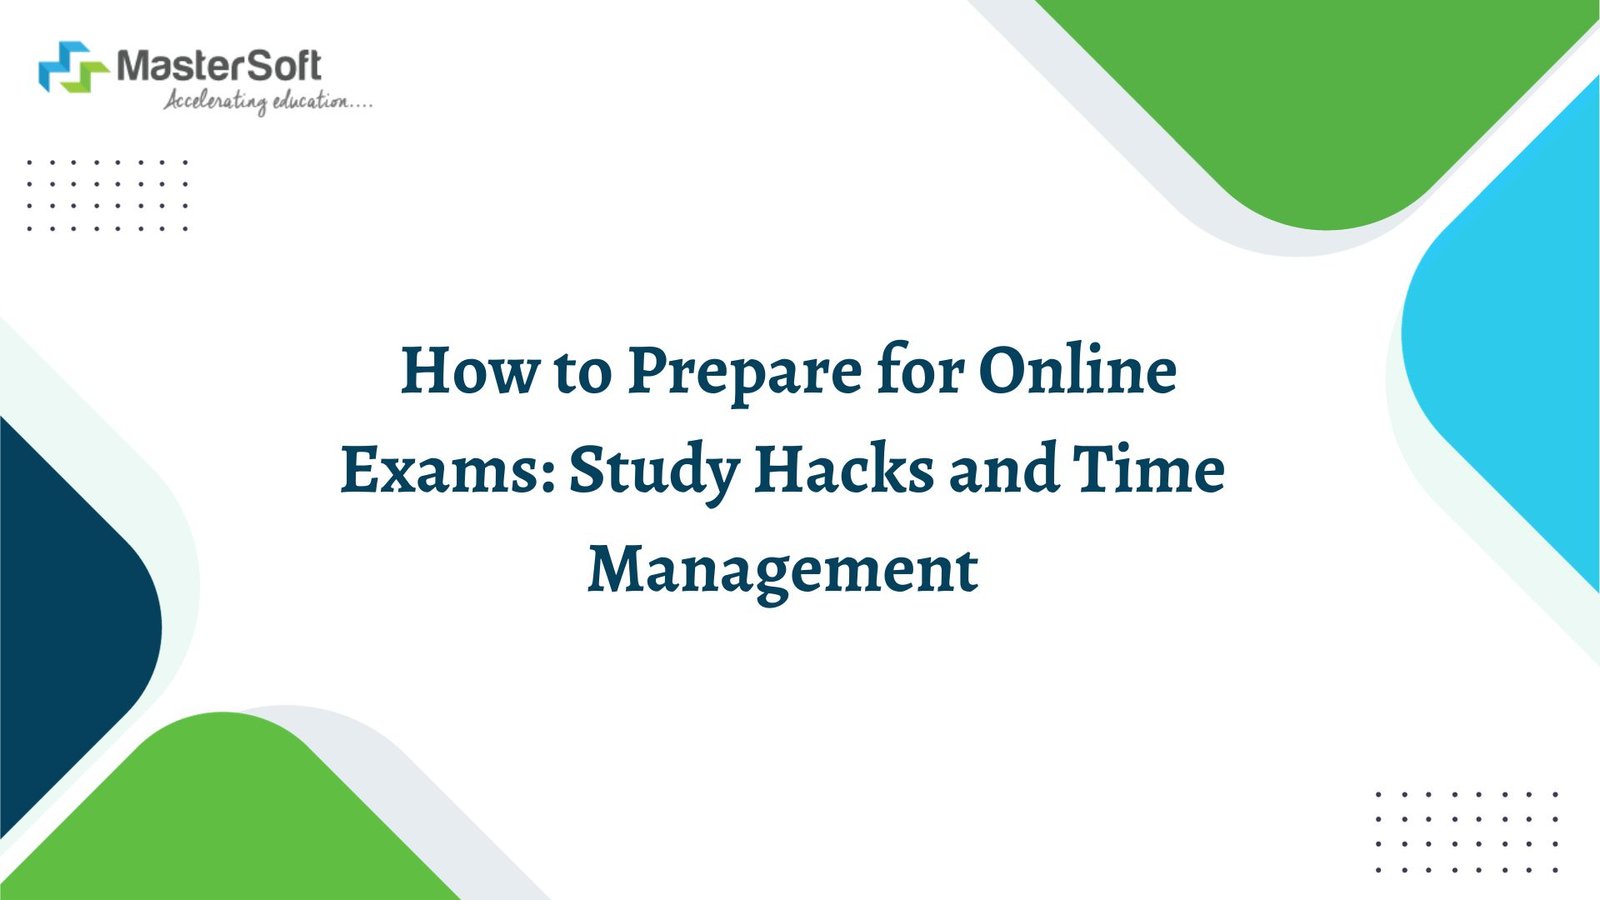 How to Prepare for Online Exams